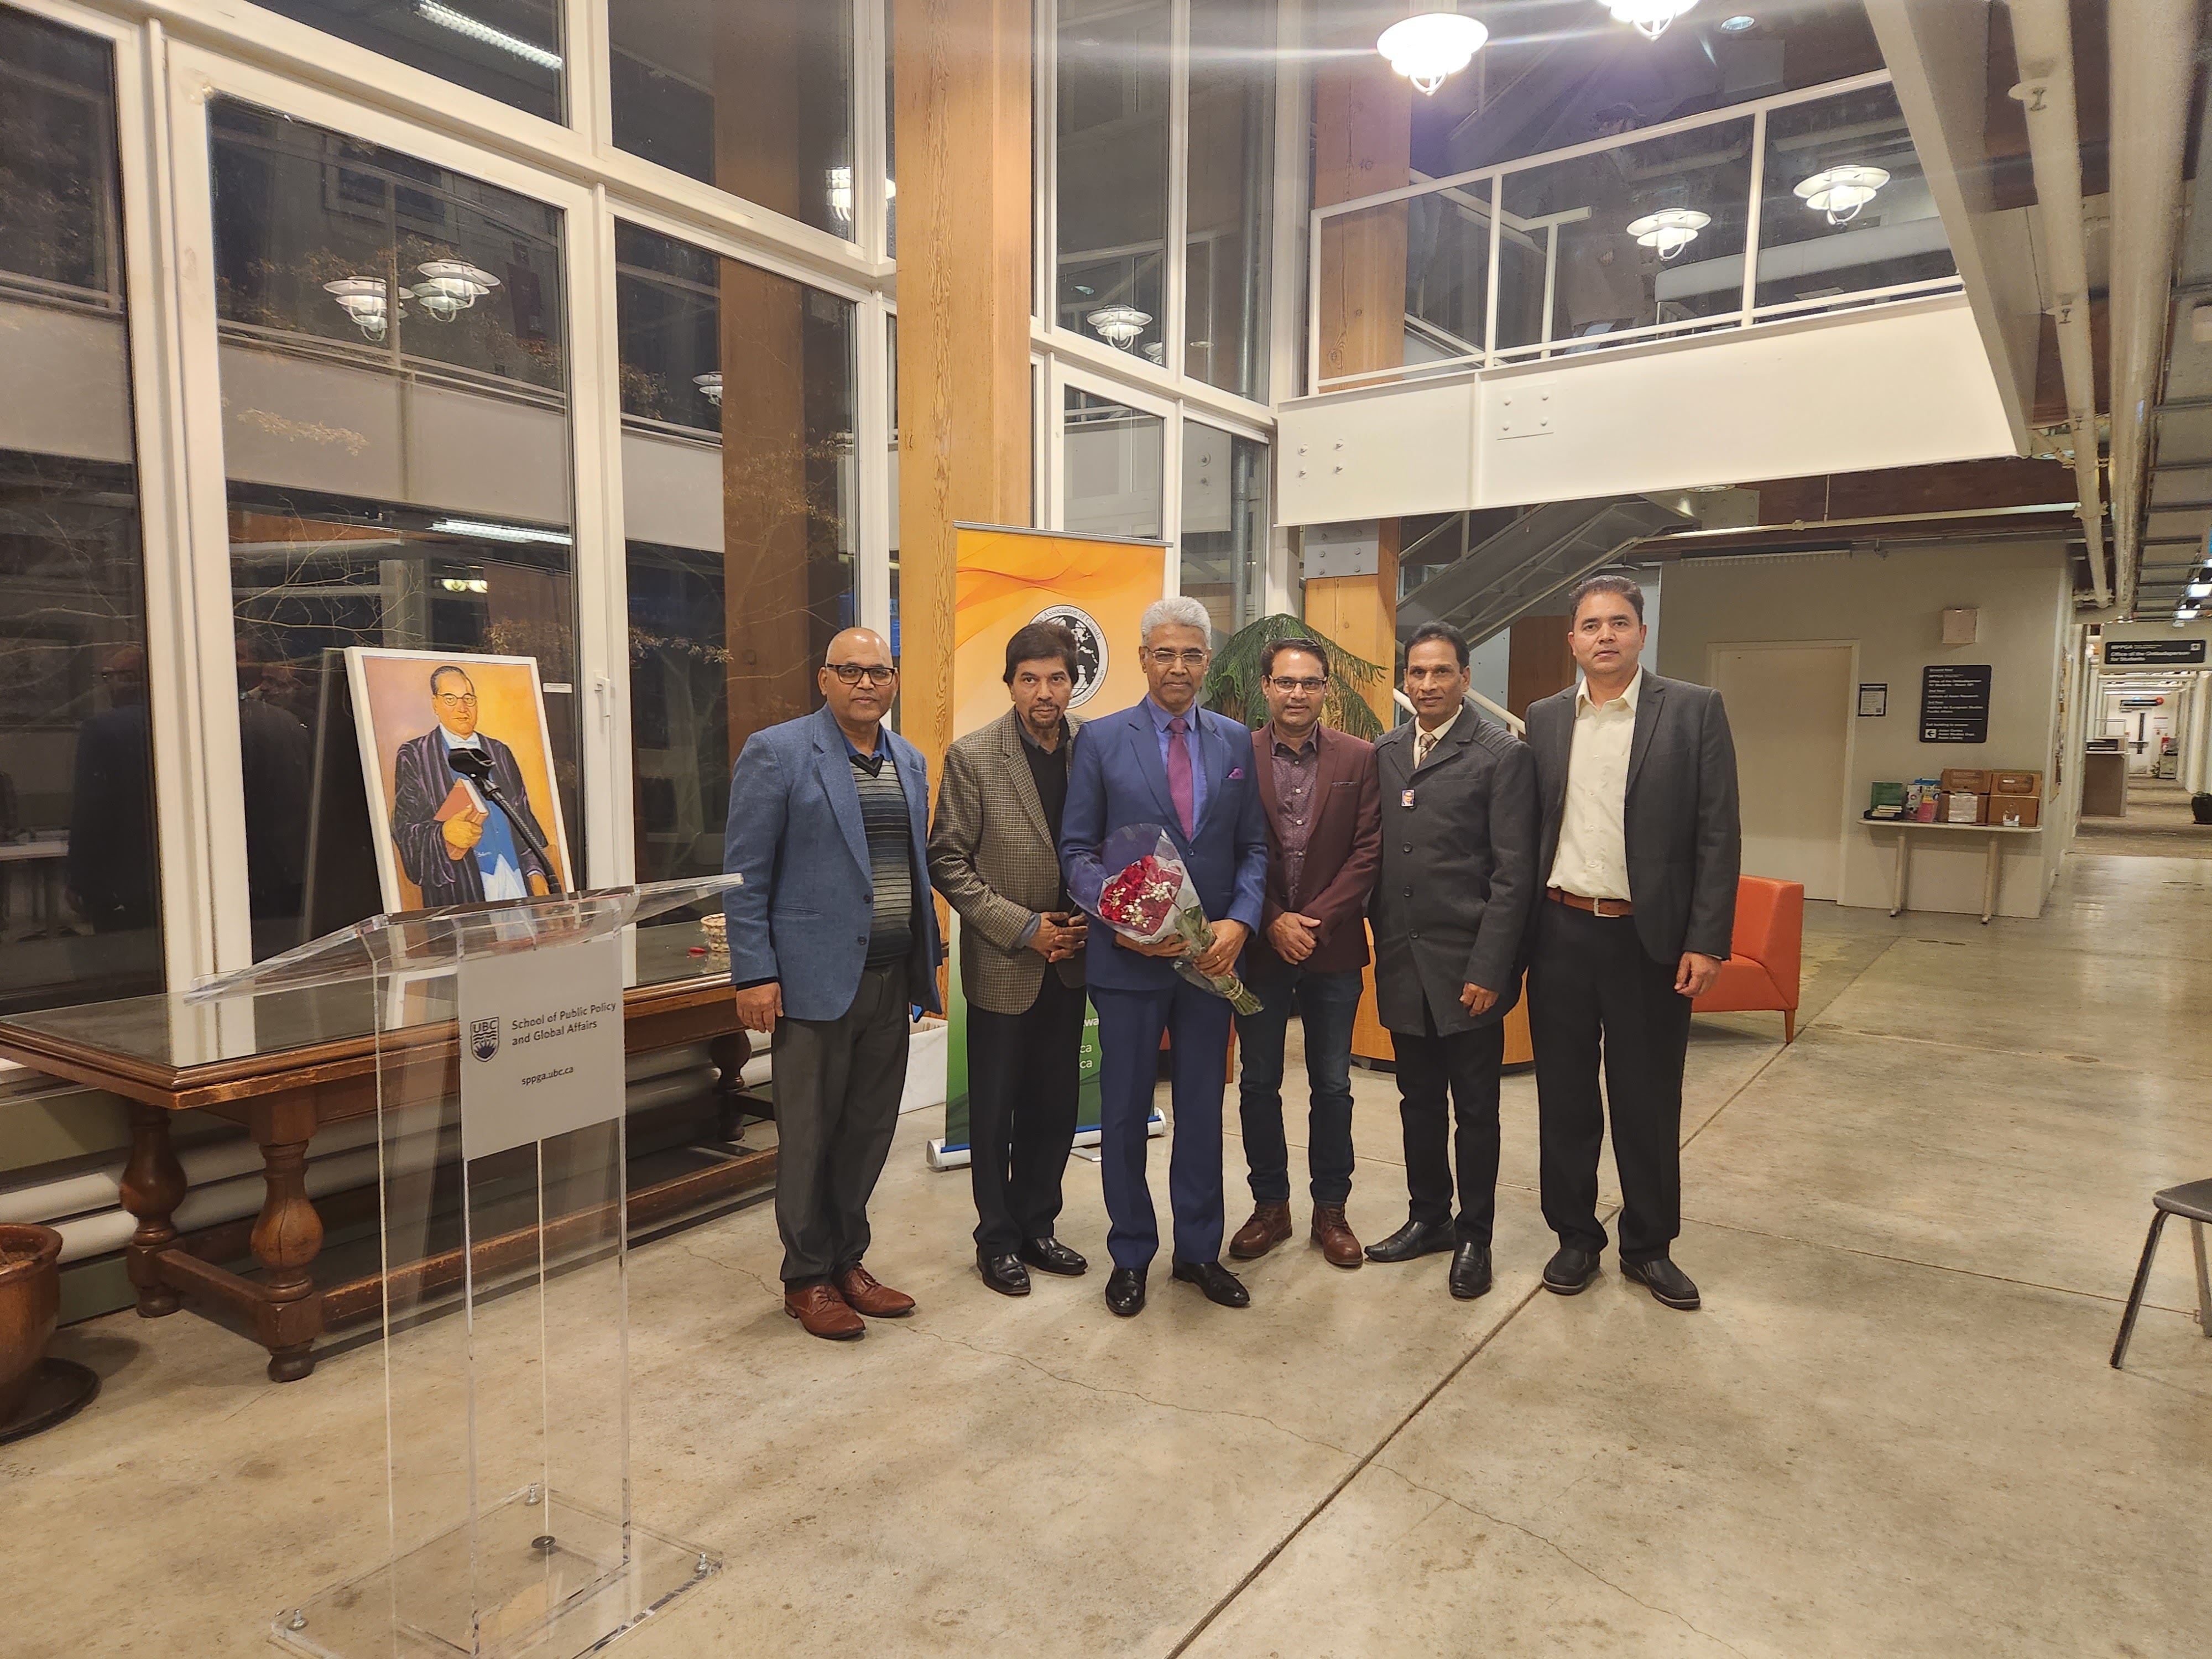 Dr. Amedkar’s Portrait Formally Gifted To Centre For India At UBC On His Death Anniversary